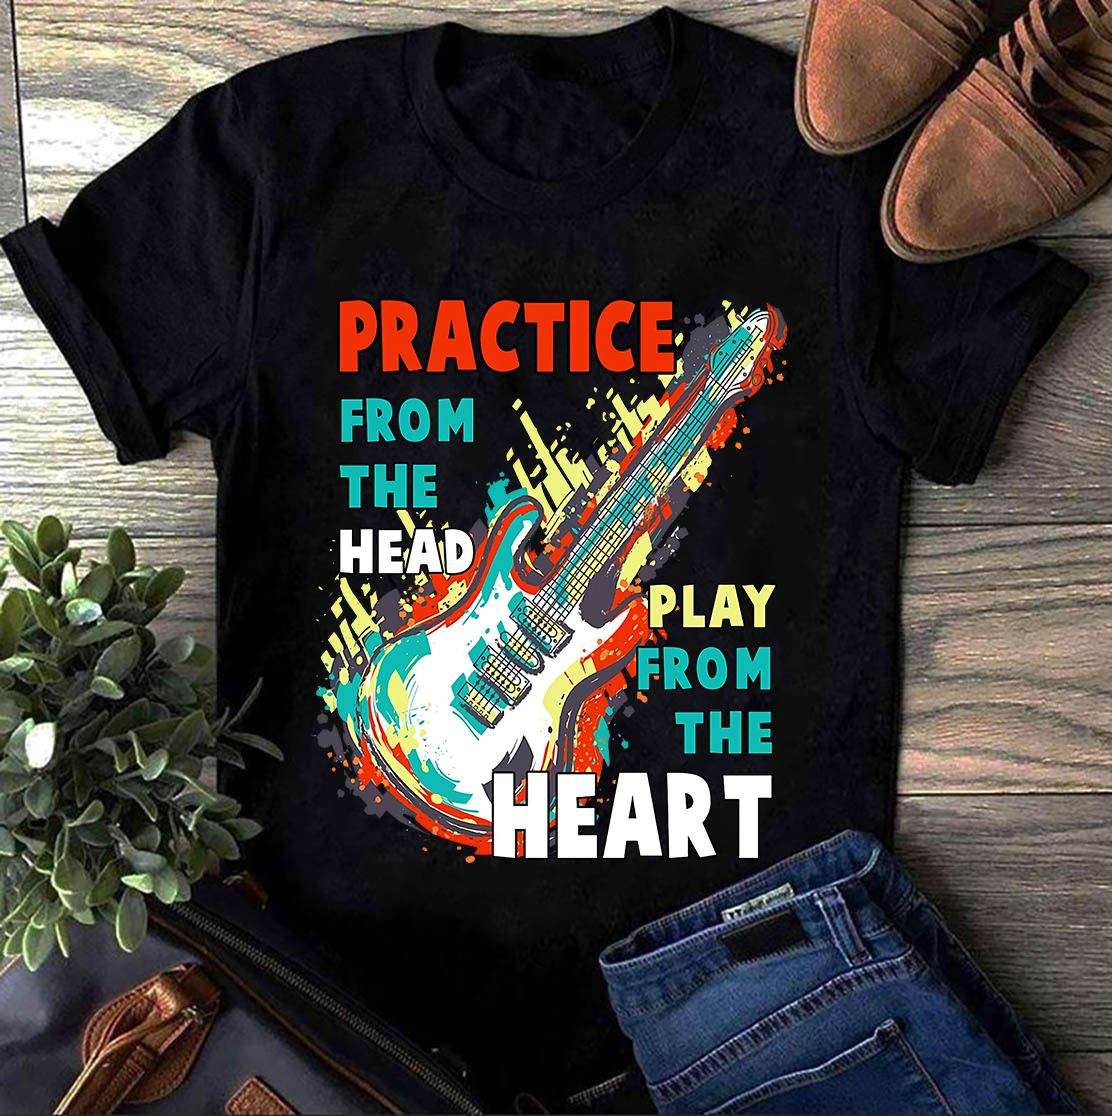 Practice from the head - Play from the heart, the heart of a guitarist